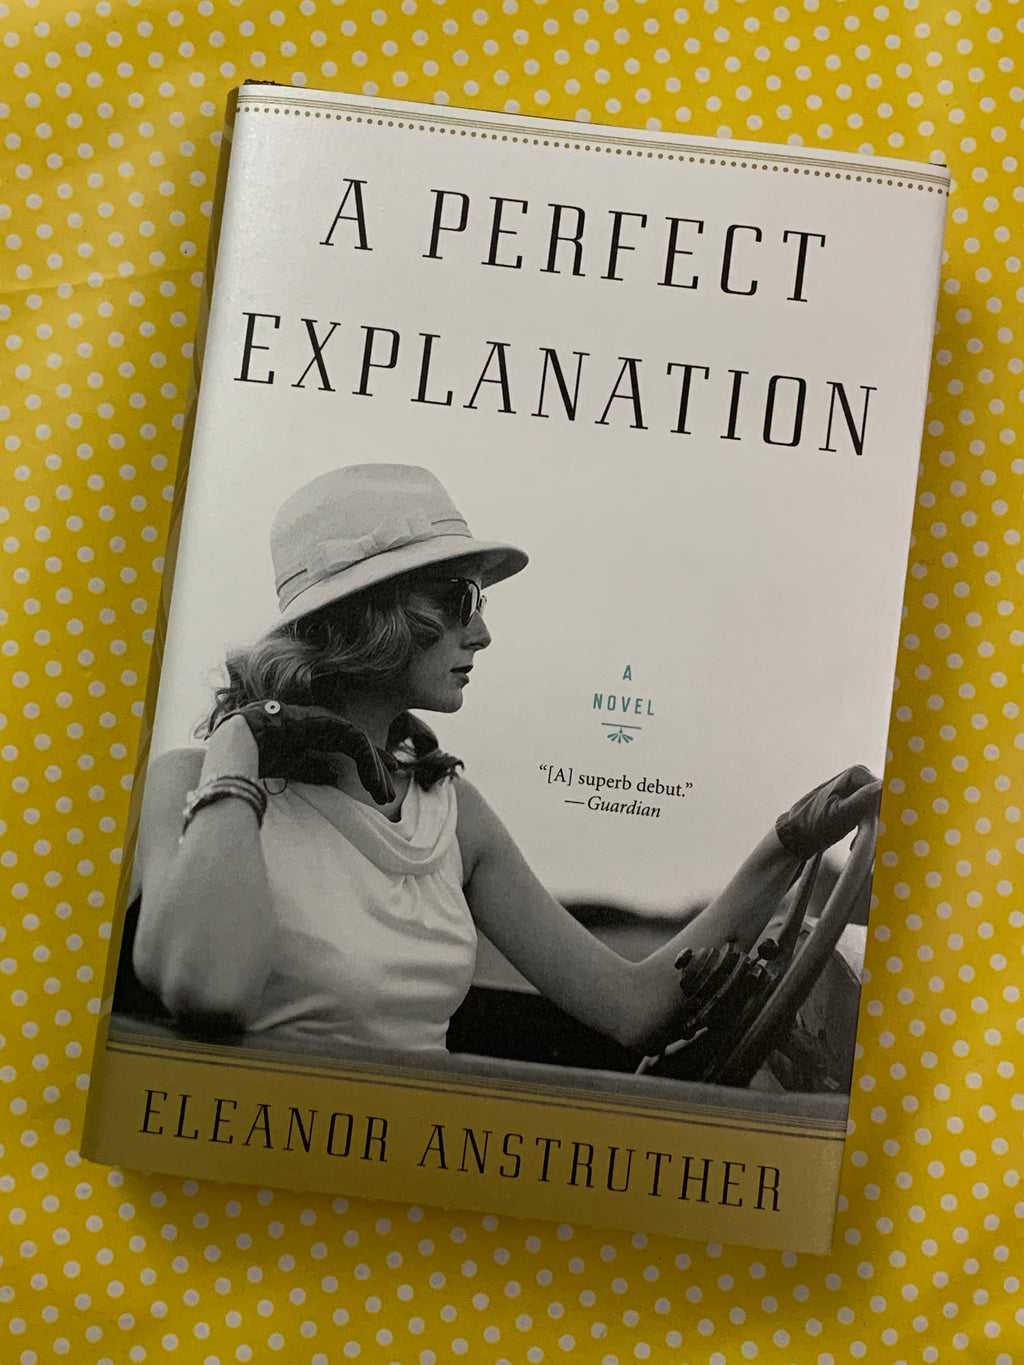 A Perfect Explanation- By Eleanor Anstruther